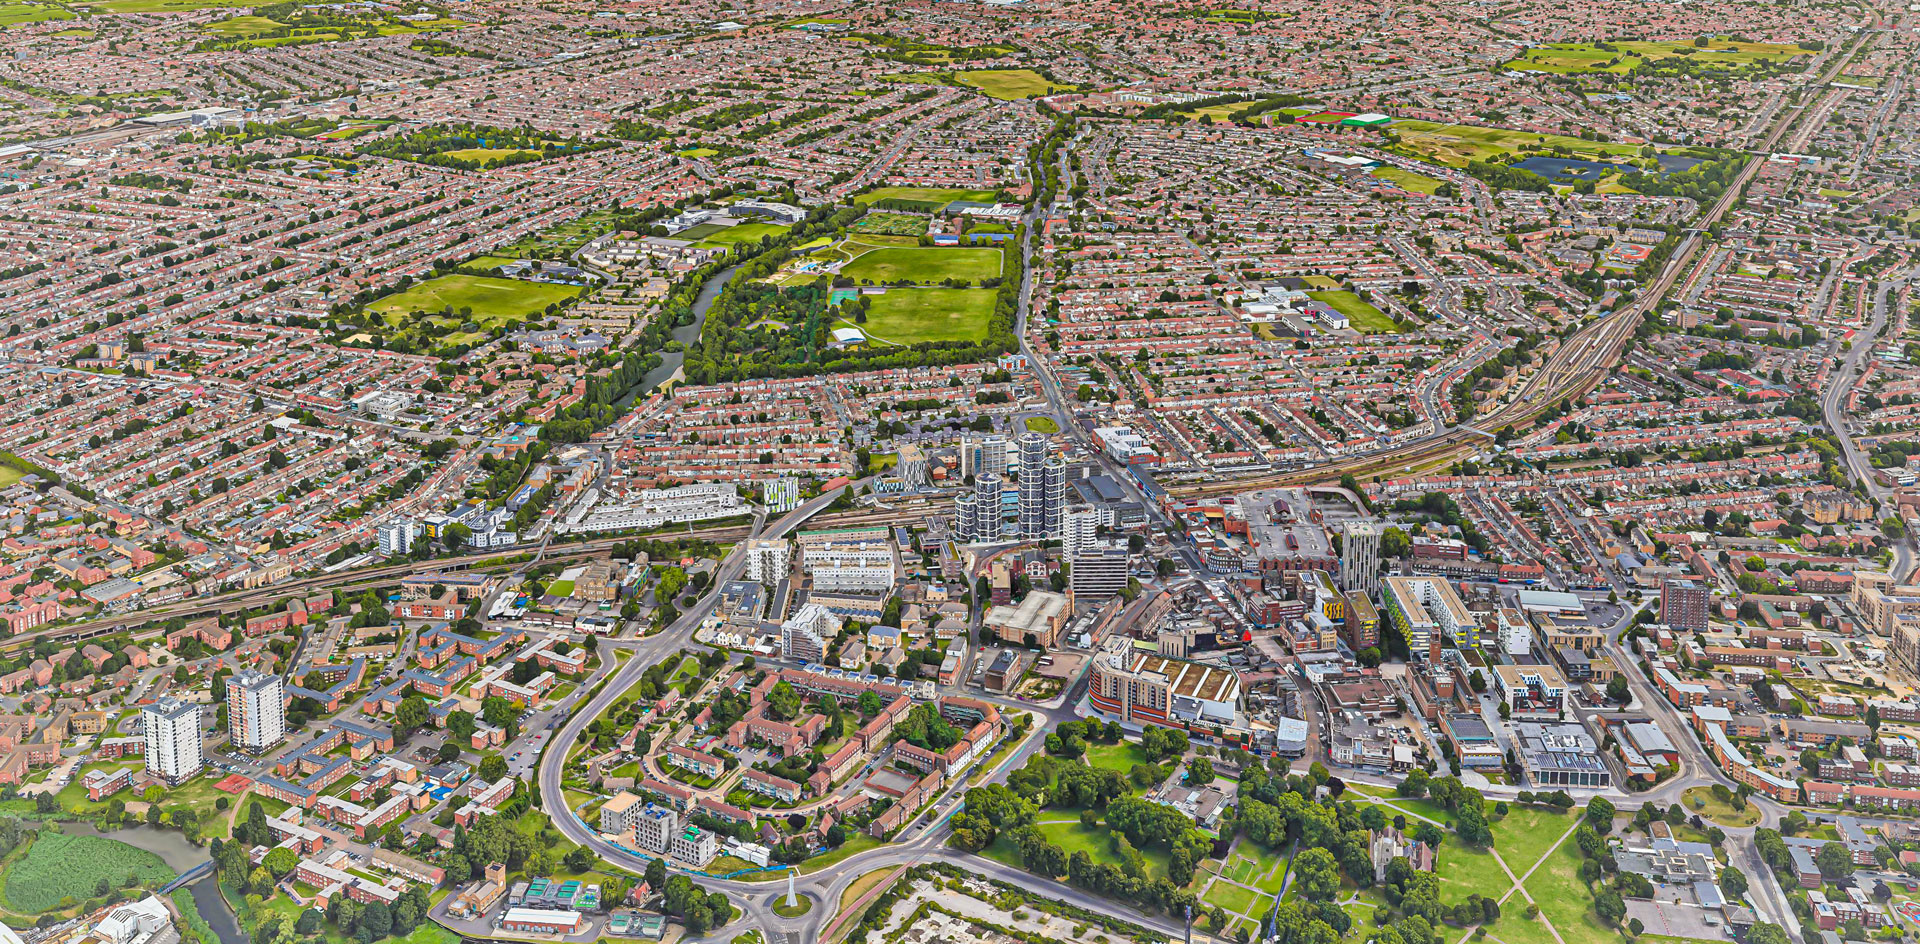 Troy Planning + Design commissioned to undertake the LB Barking & Dagenham Infrastructure Delivery Plan